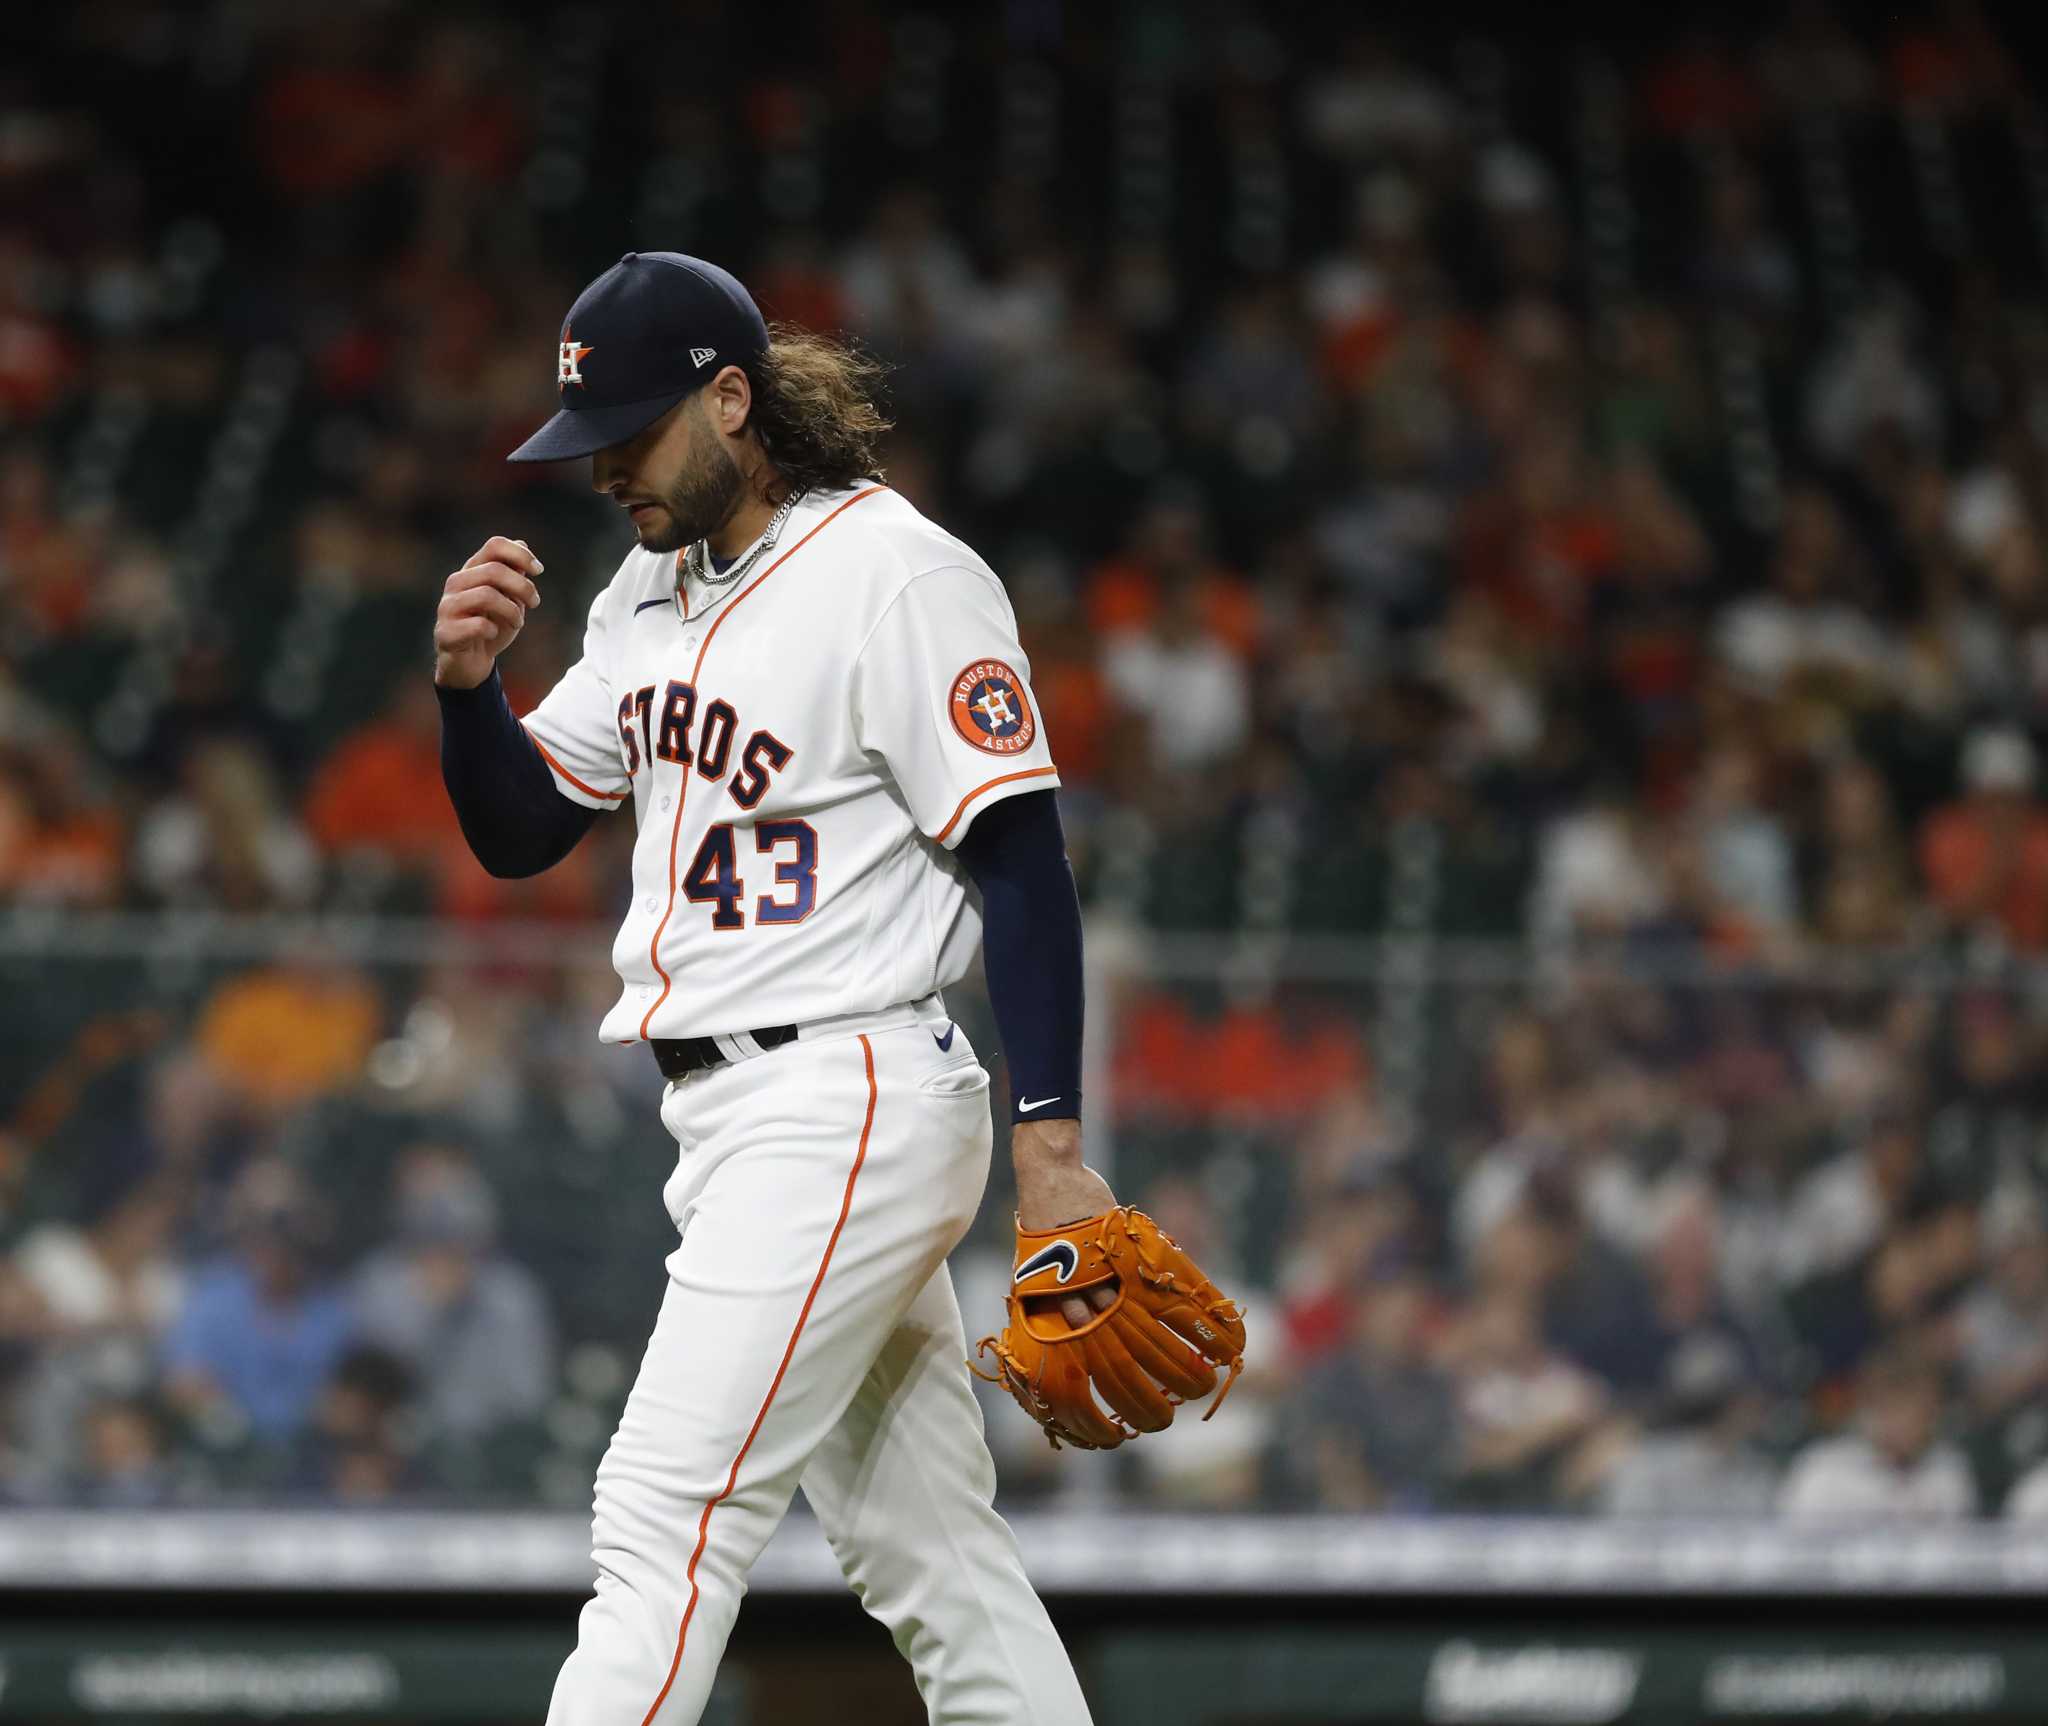 Astros Win Pitcher's Duel 5-1 over Angels and Ohtani - The